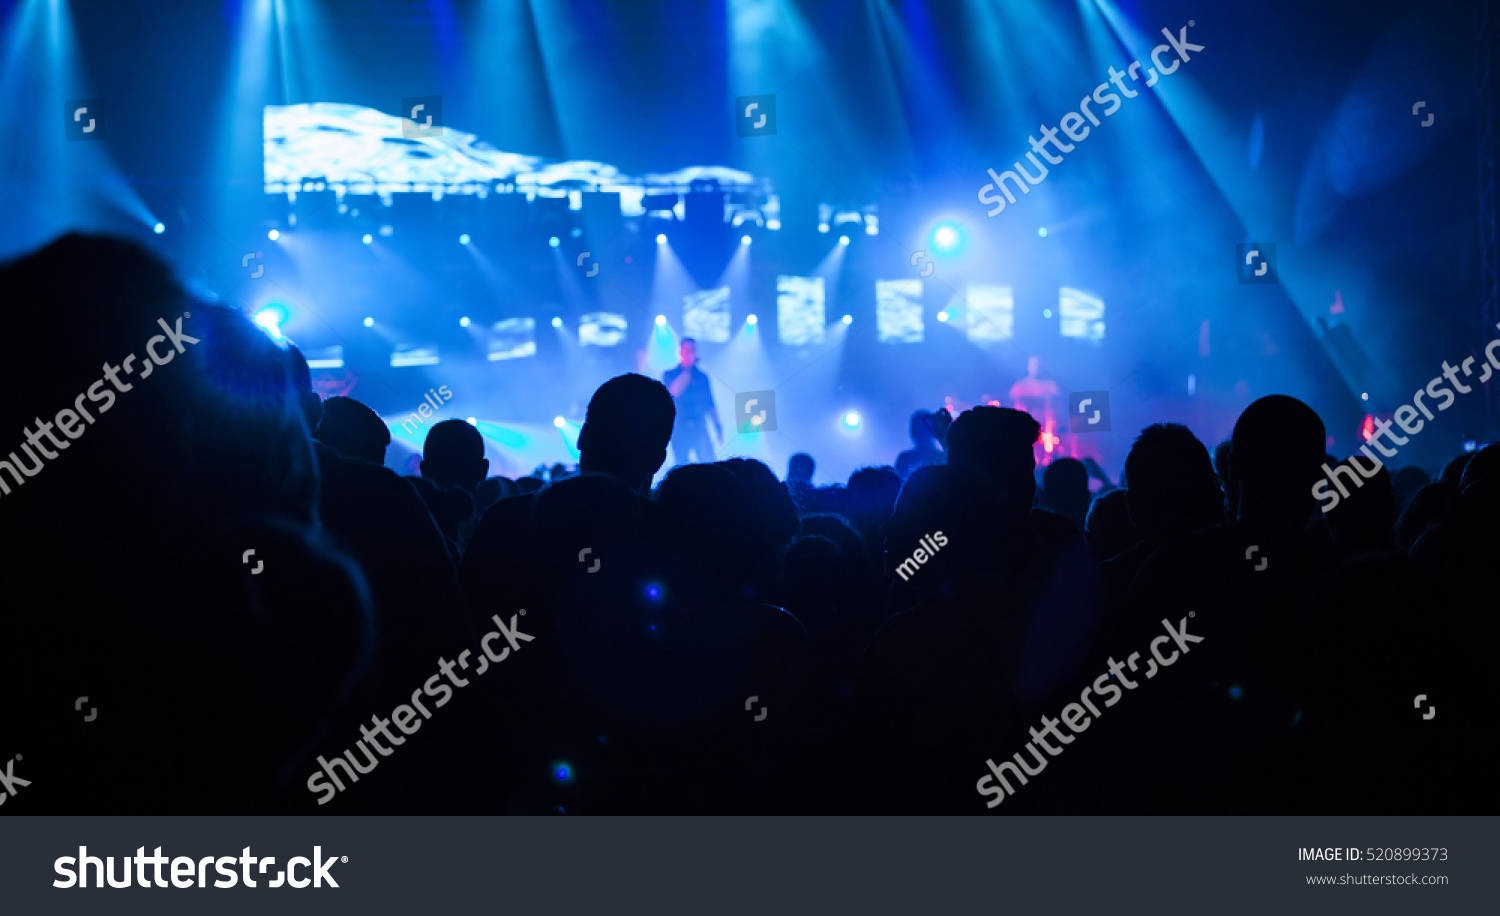 Crowd at concert - Cheering crowd in front of bright colorful stage lights #520899373